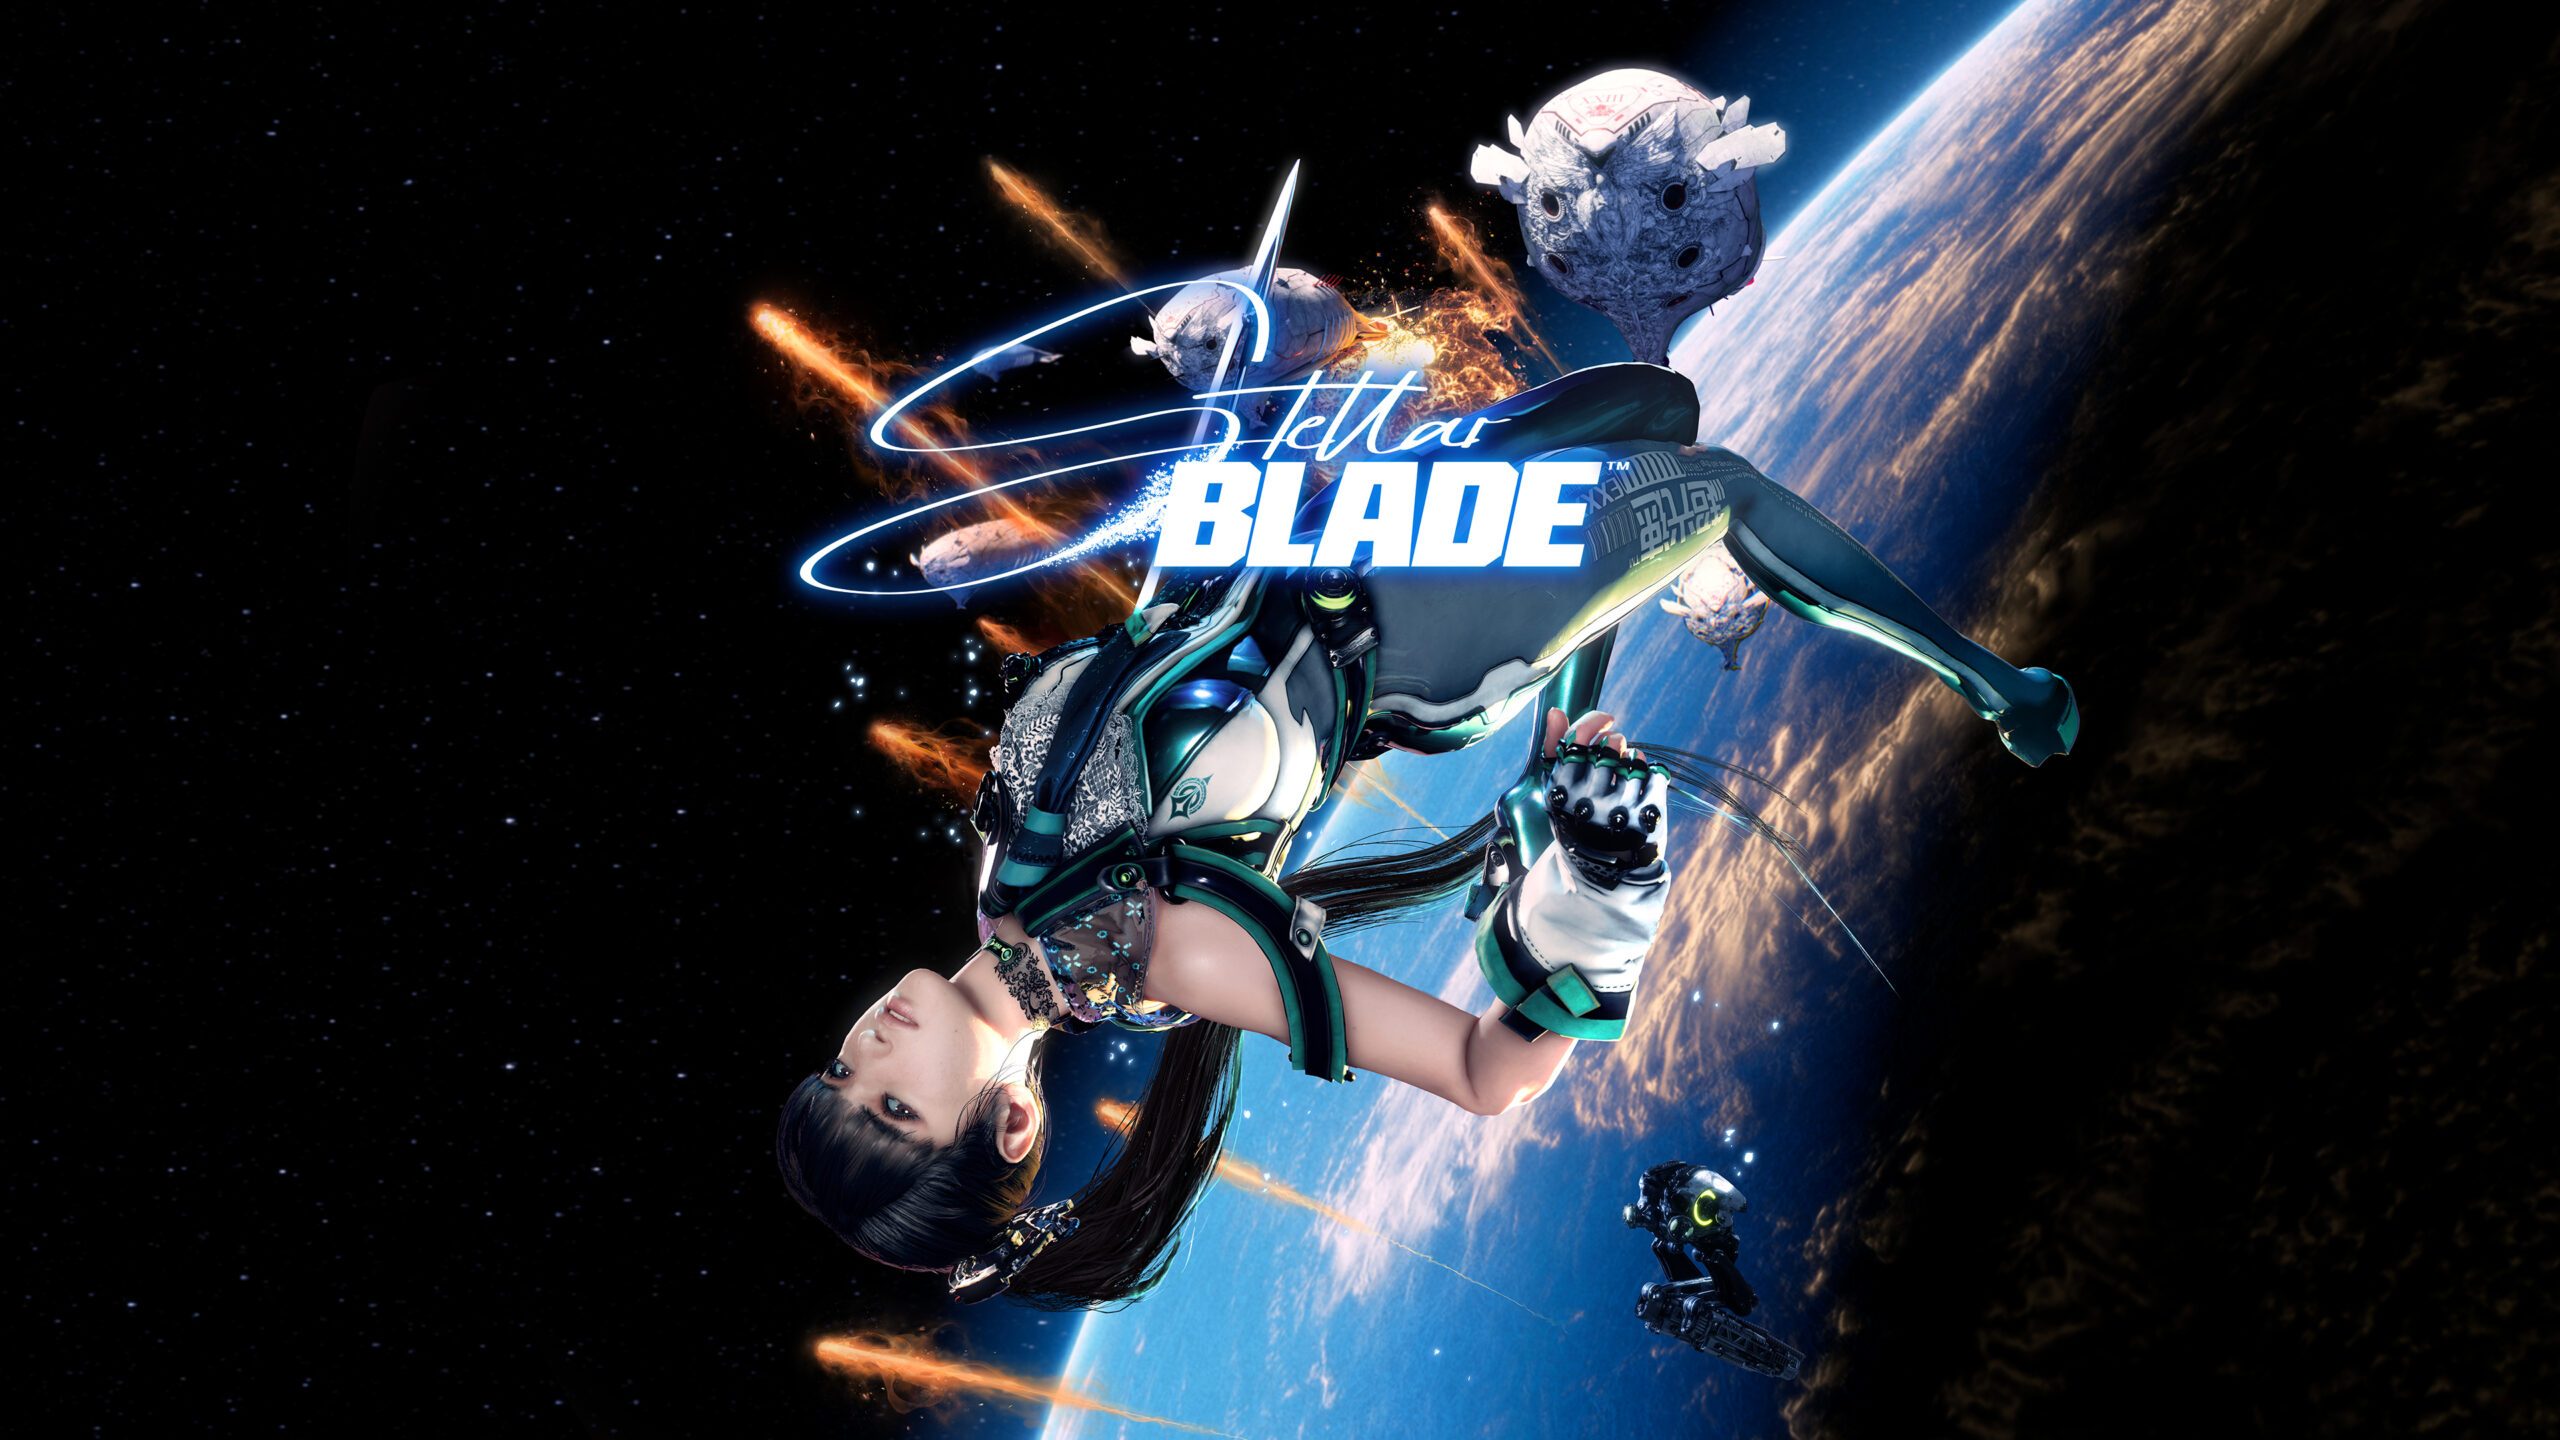 Stellar Blade Preview |OT| Releases April 26th. Stellar Blade is 